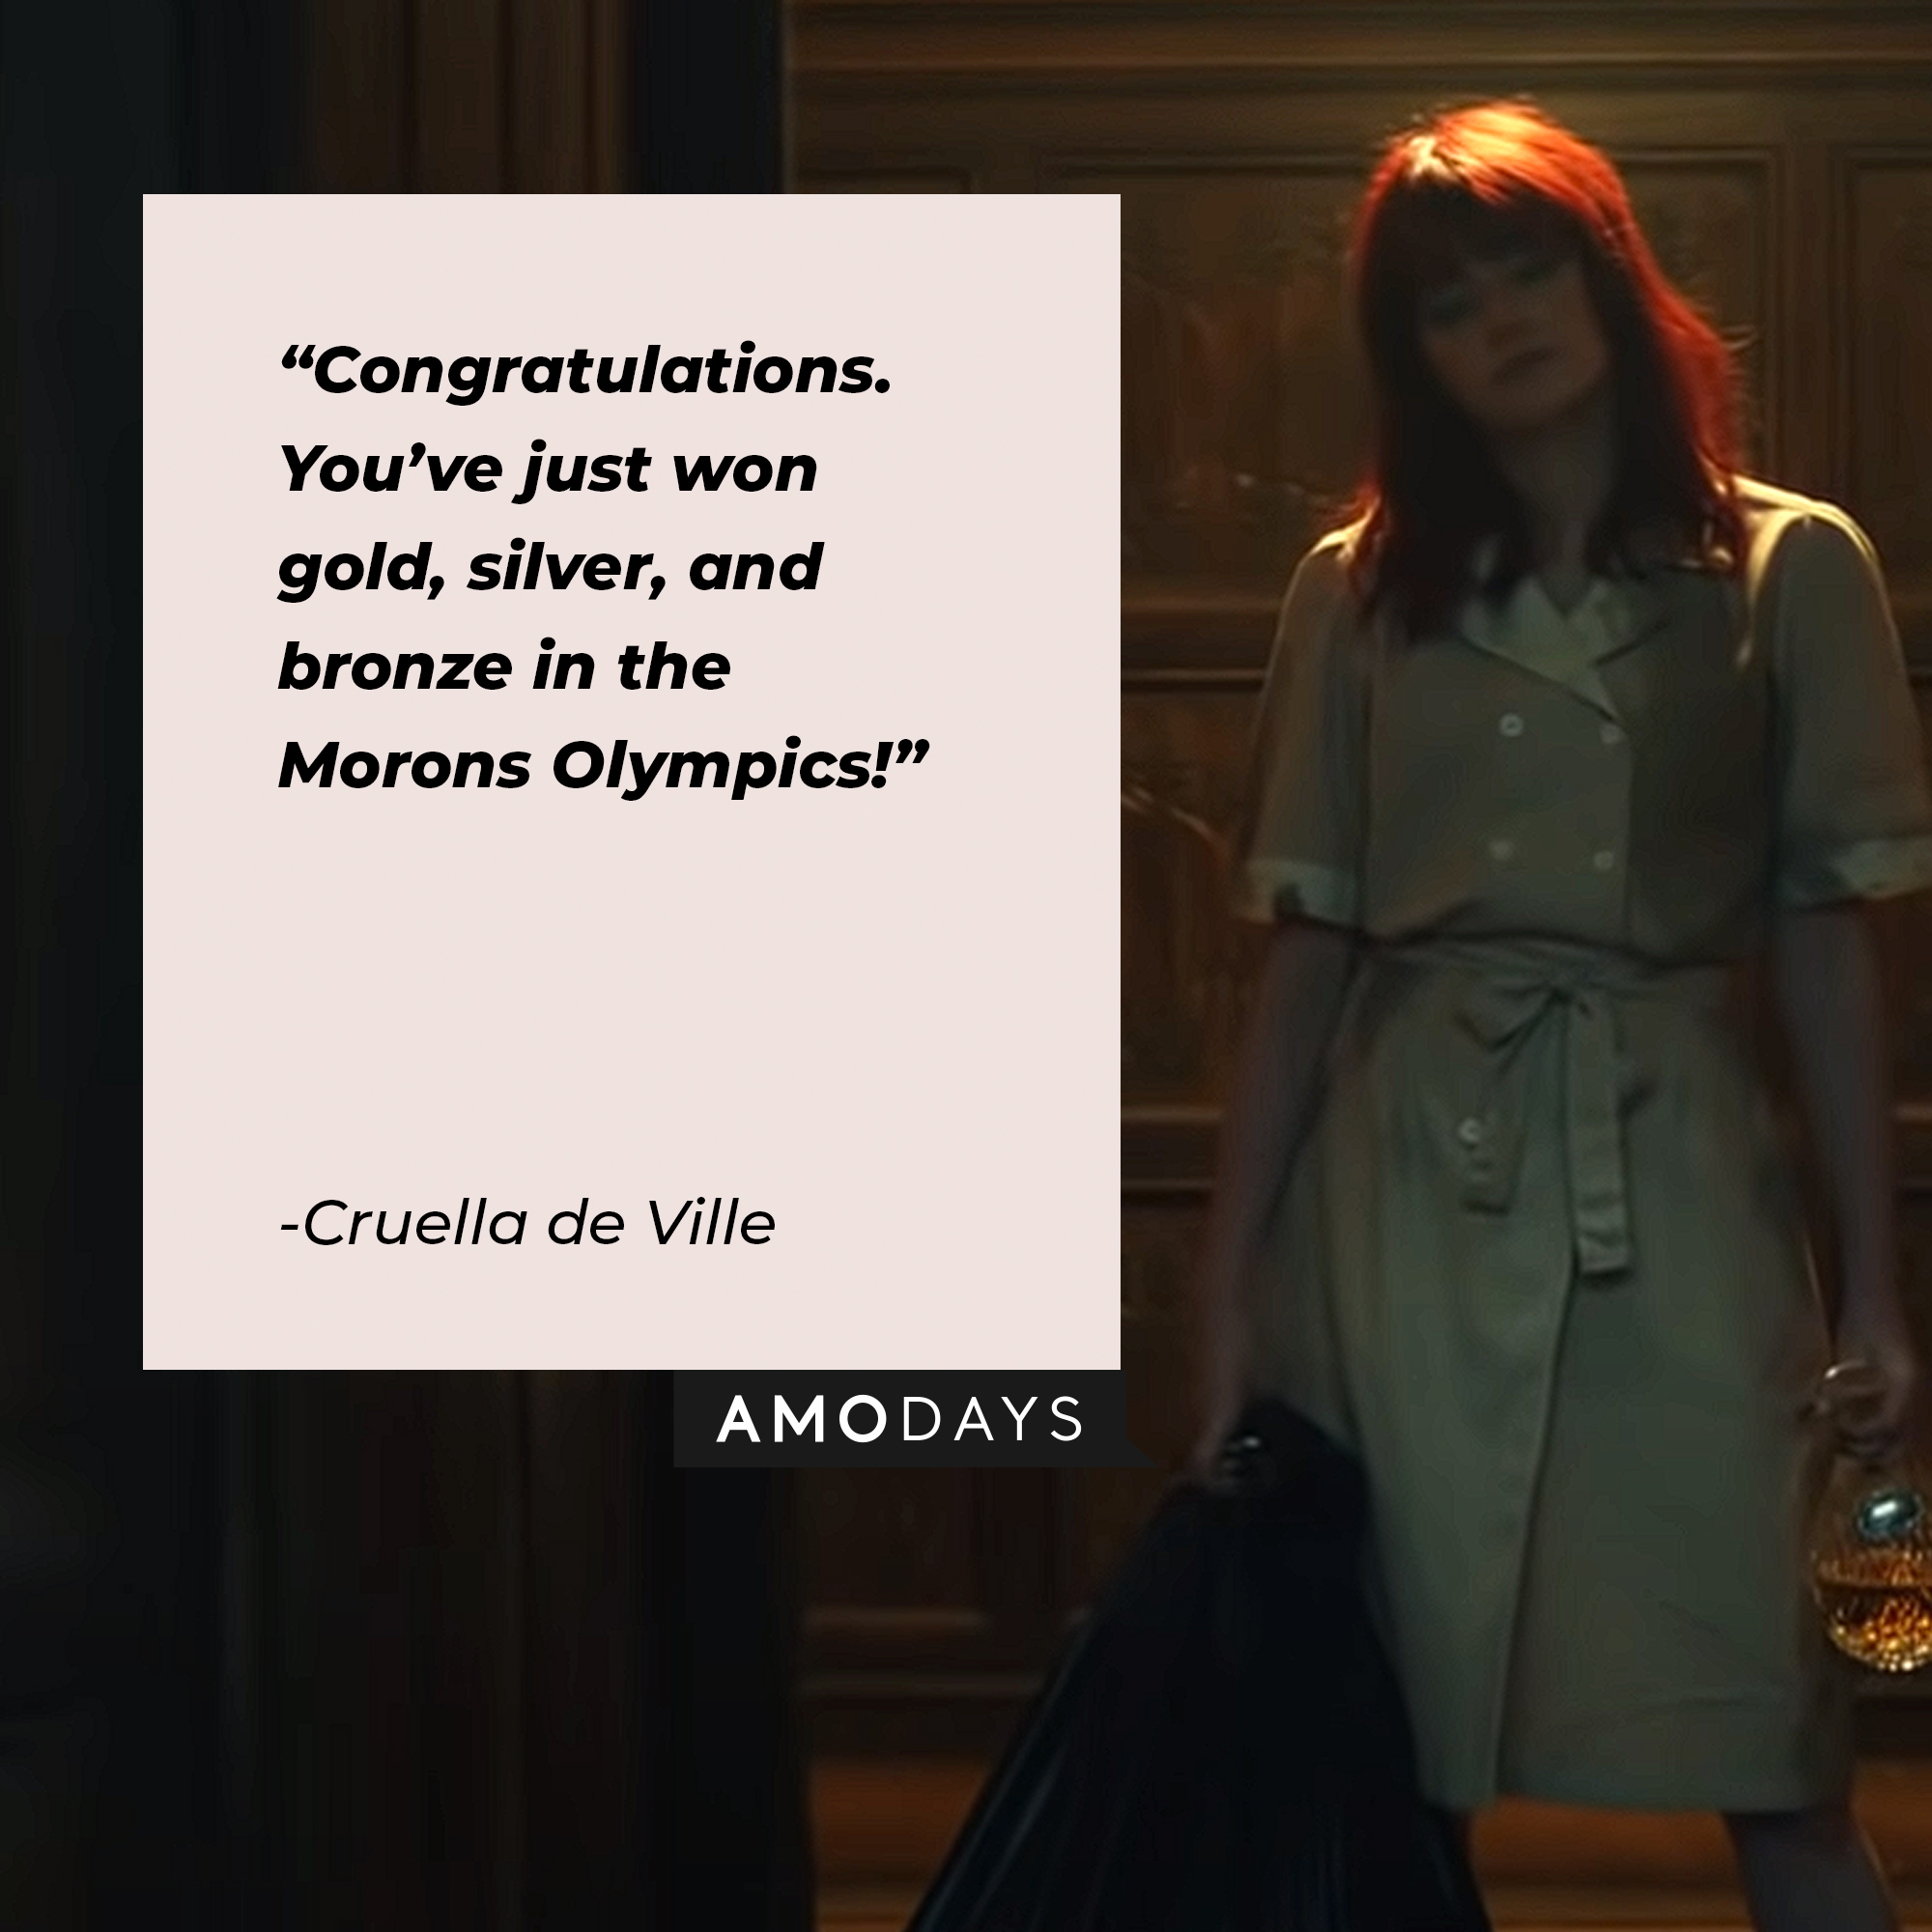 Cruella de Ville’s quote: "Congratulations. You've just won gold, silver, and bronze in the Morons Olympics!" | Image: AmoDays